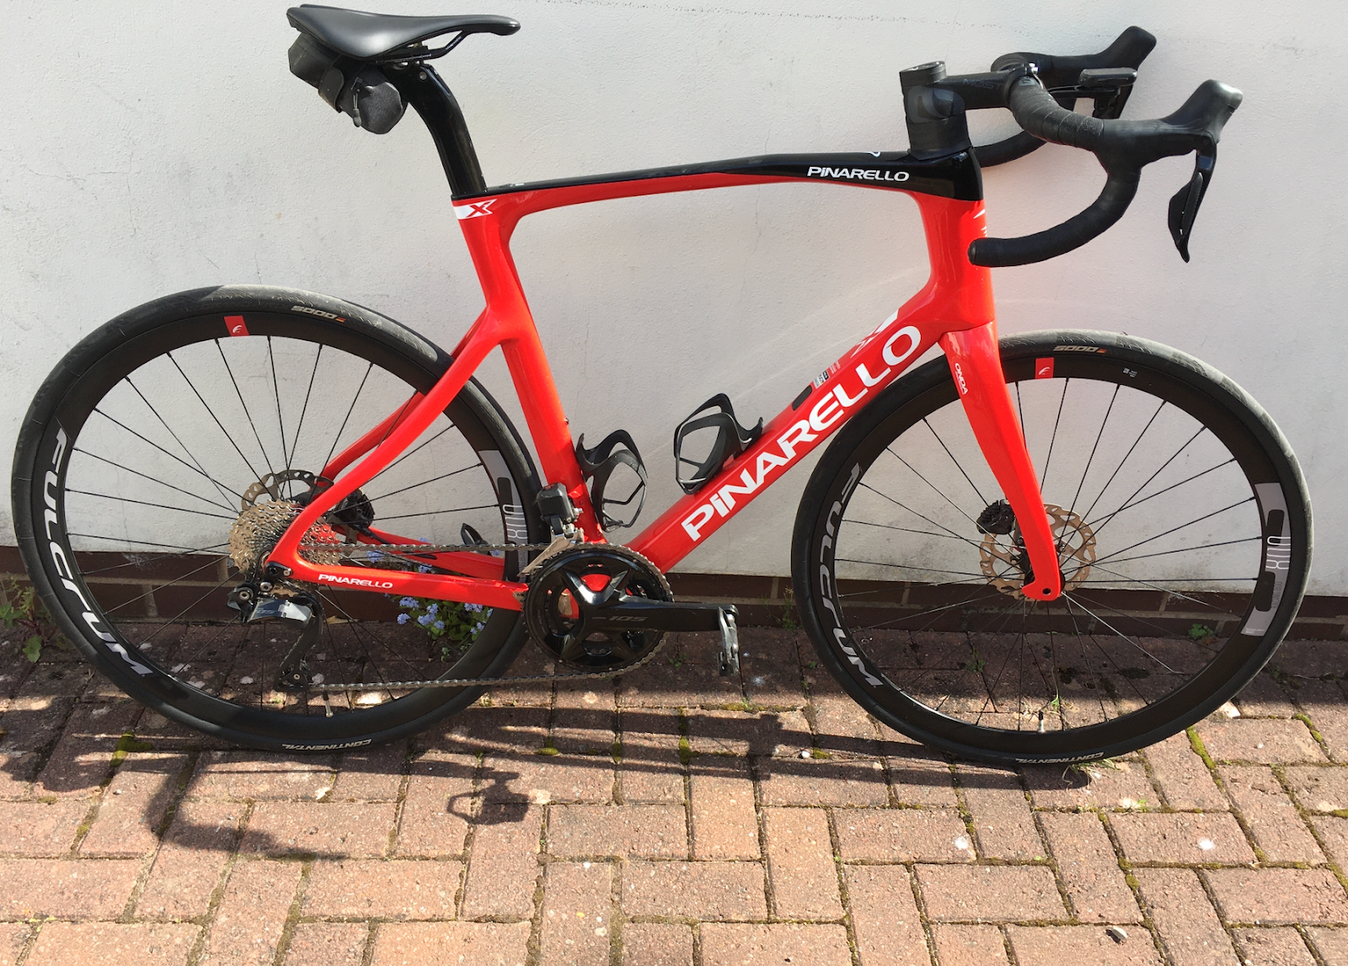 Tim's Pinarello X is prepared for climbs with a largest 36t cog on the cassette